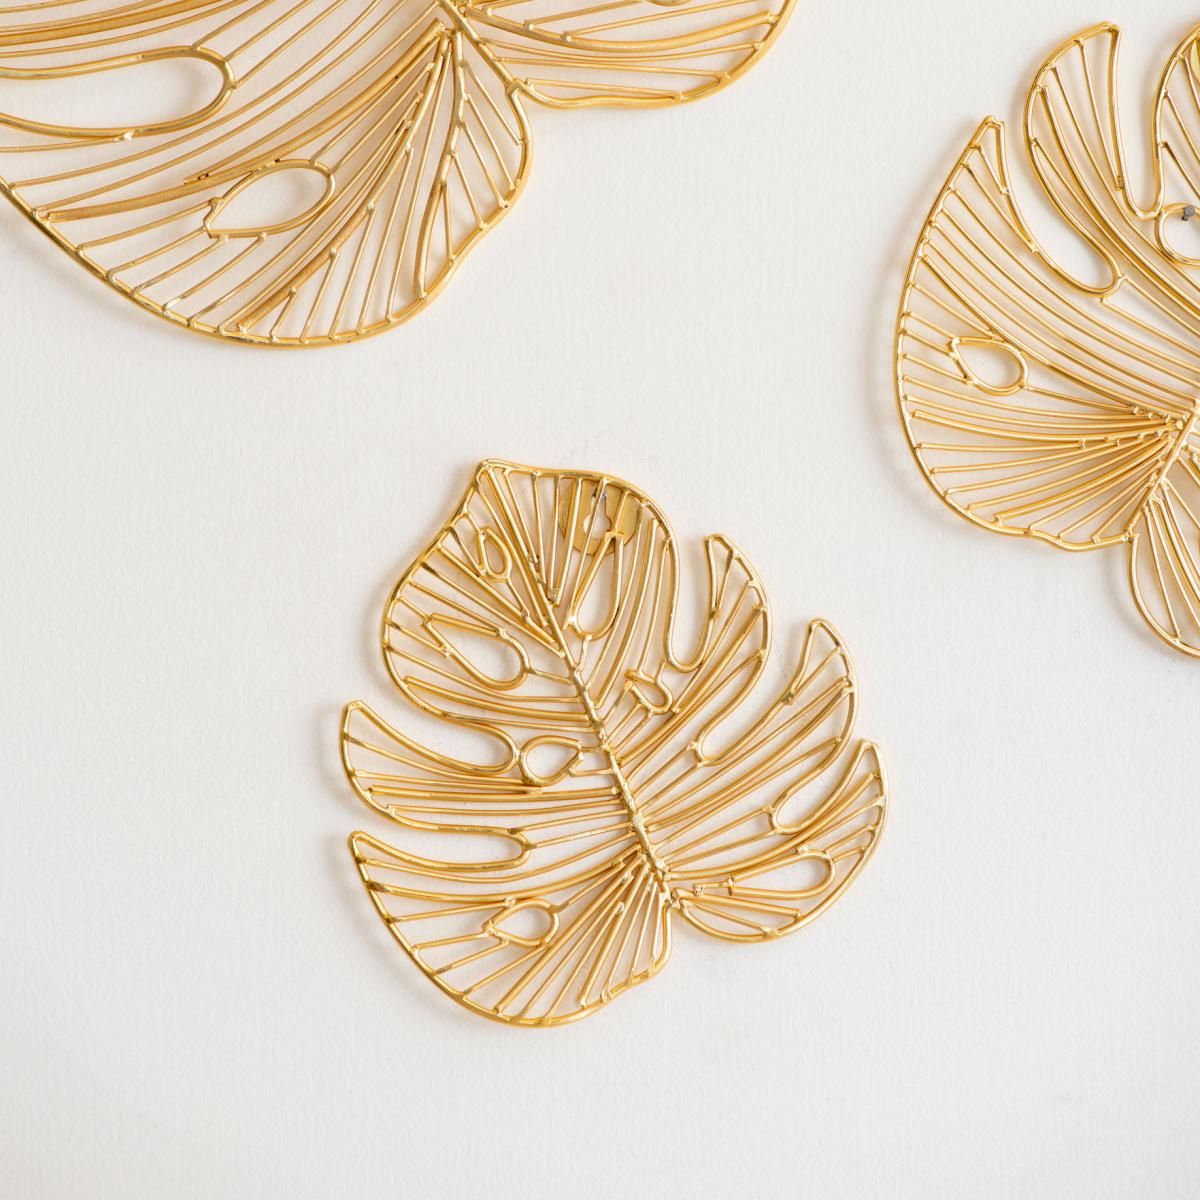 Palm Leaf Set Of 3 Wall Decor Gold – The Decor Remedy With Regard To Current Gold Leaves Wall Art (Gallery 20 of 20)